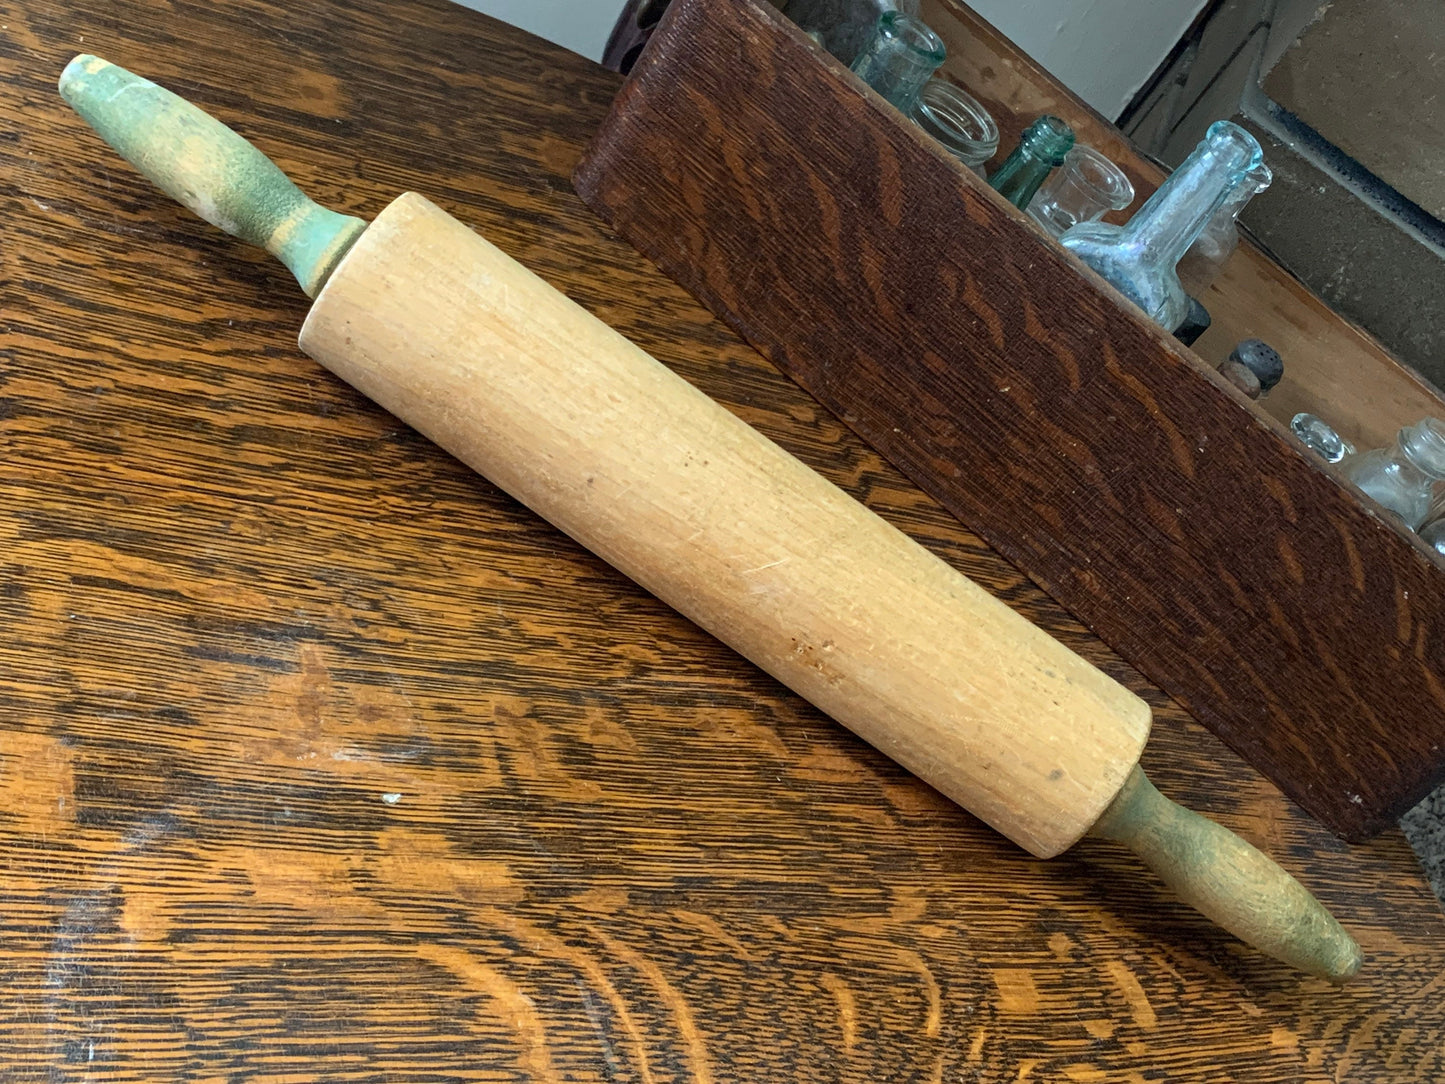 Vintage Wooden Rolling Pin